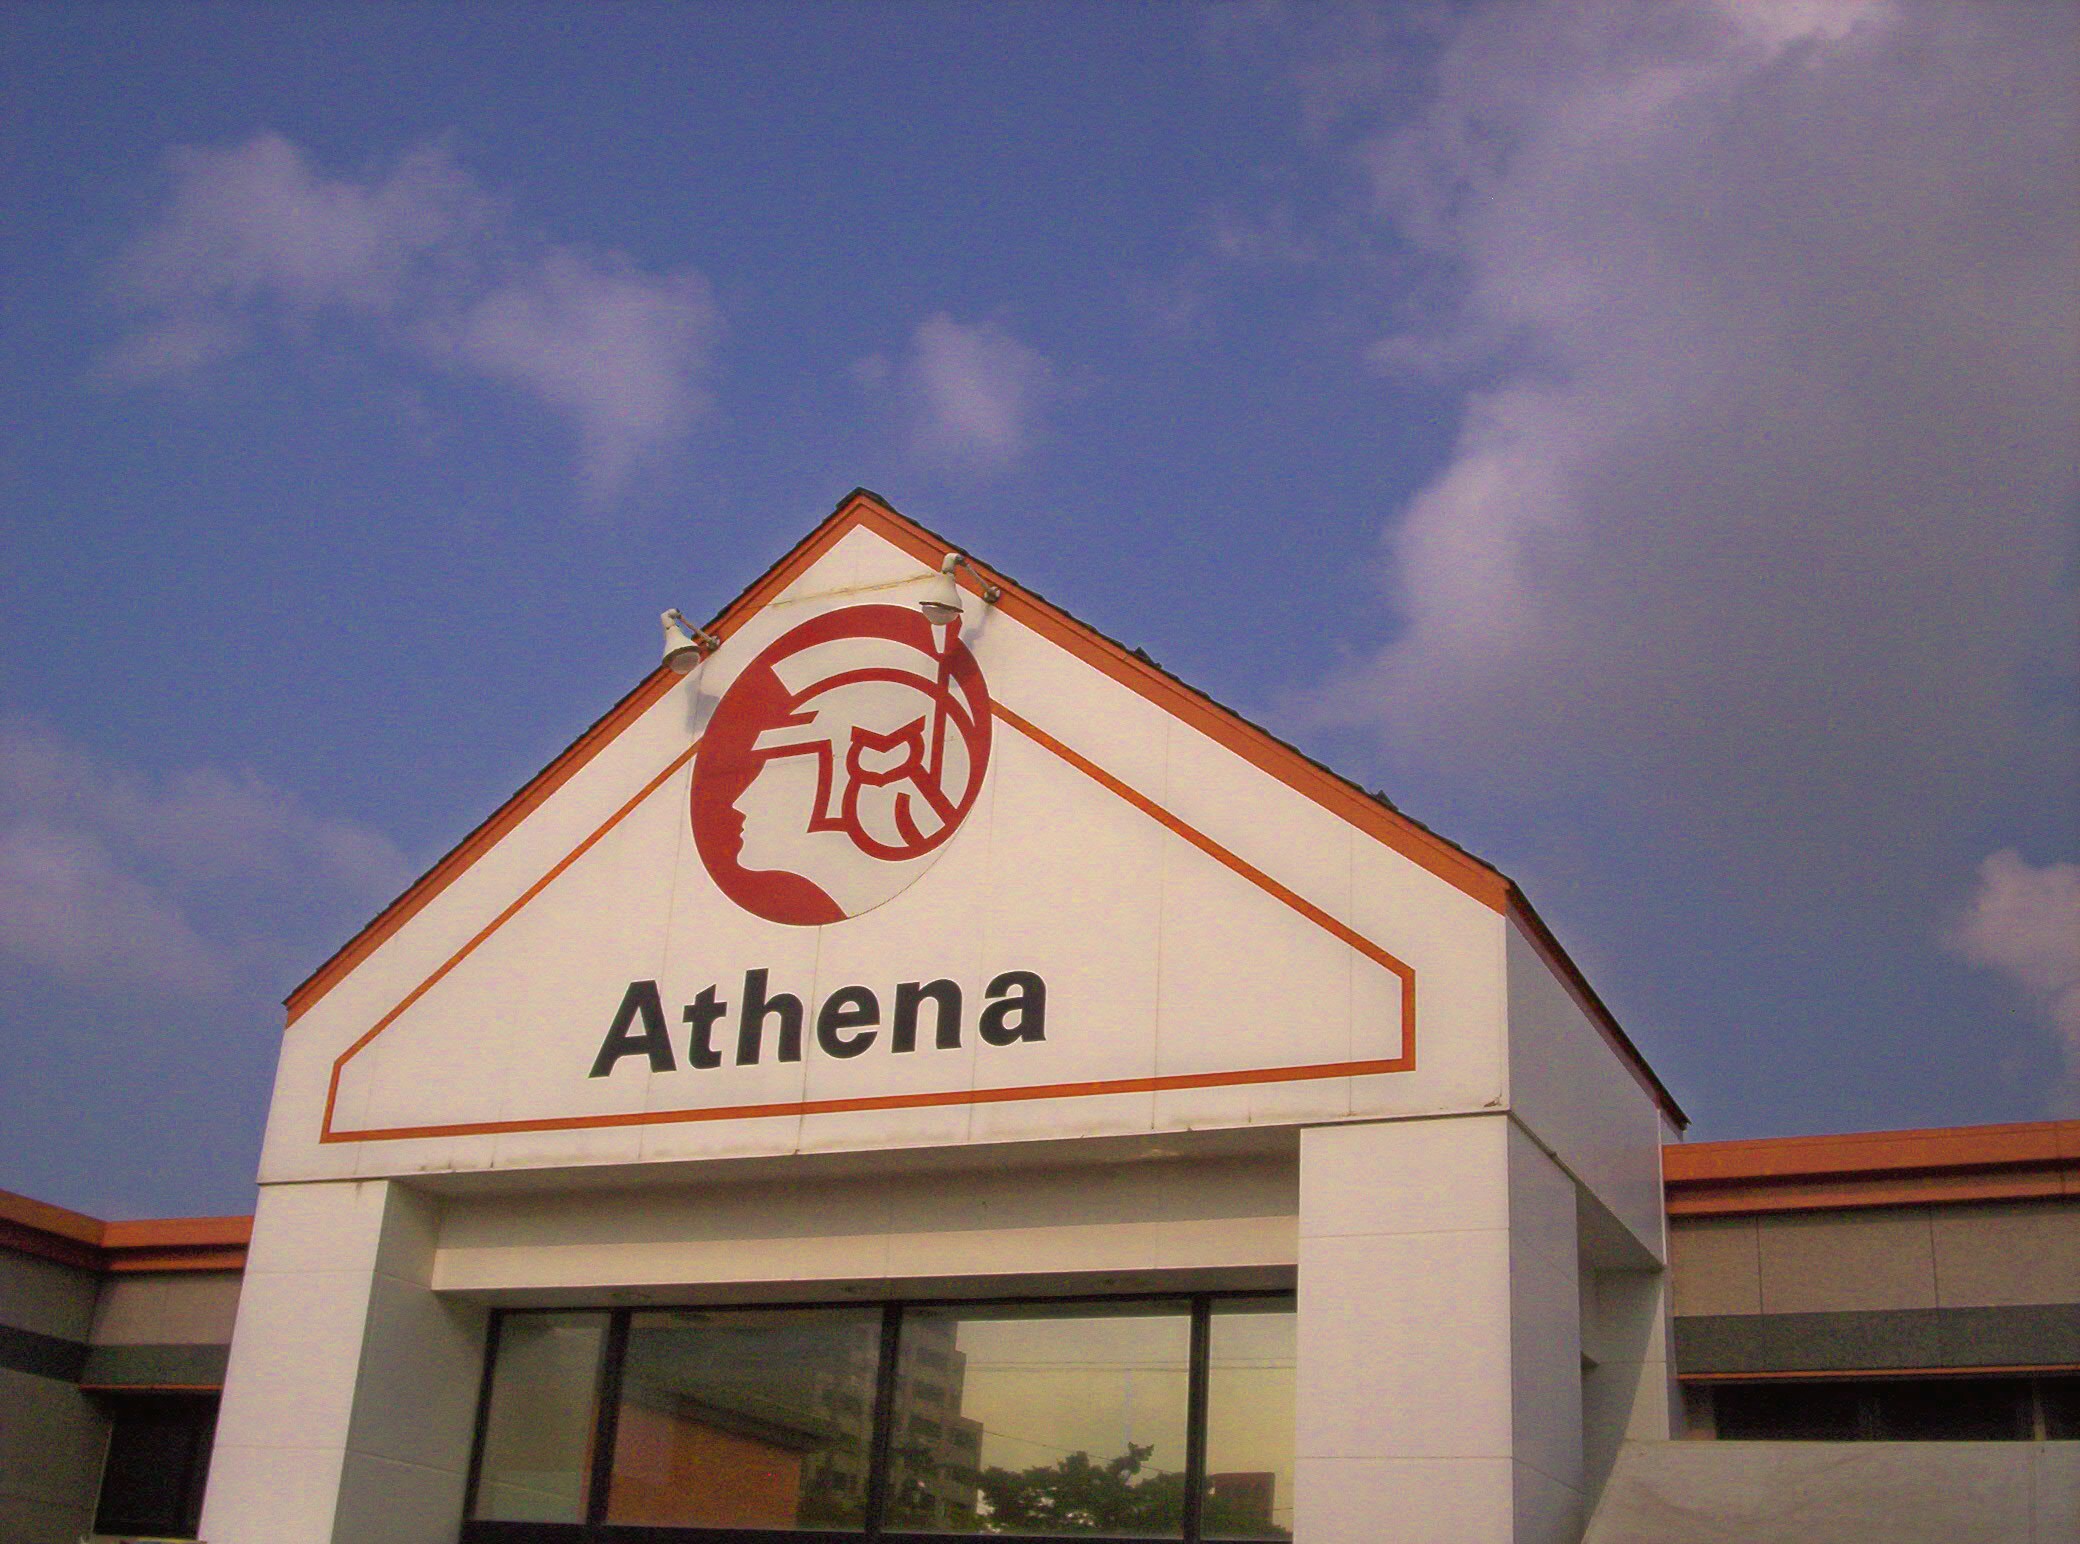 Aaaand here's the prize of today's hunt. Athena is a home furnishings store. This one is indisputable. Look at the logo: she's got the helmet, the spear, and the owl on her shoulder. This is the Greek goddess Athena, the warrior, the skillful, the wise one. You'd better believe mythology is alive and ubiquitous!